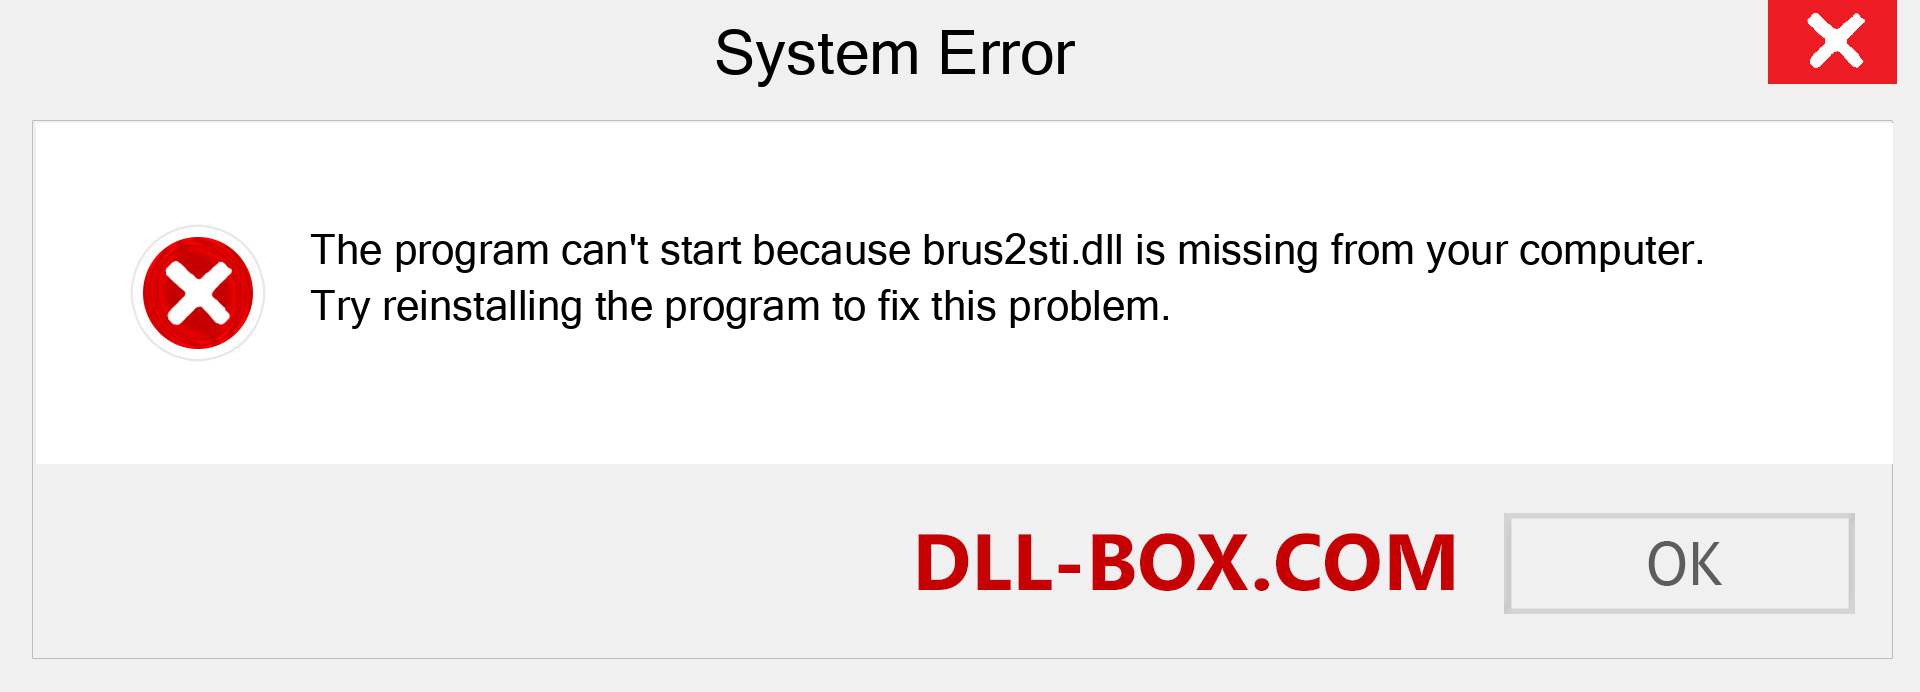  brus2sti.dll file is missing?. Download for Windows 7, 8, 10 - Fix  brus2sti dll Missing Error on Windows, photos, images